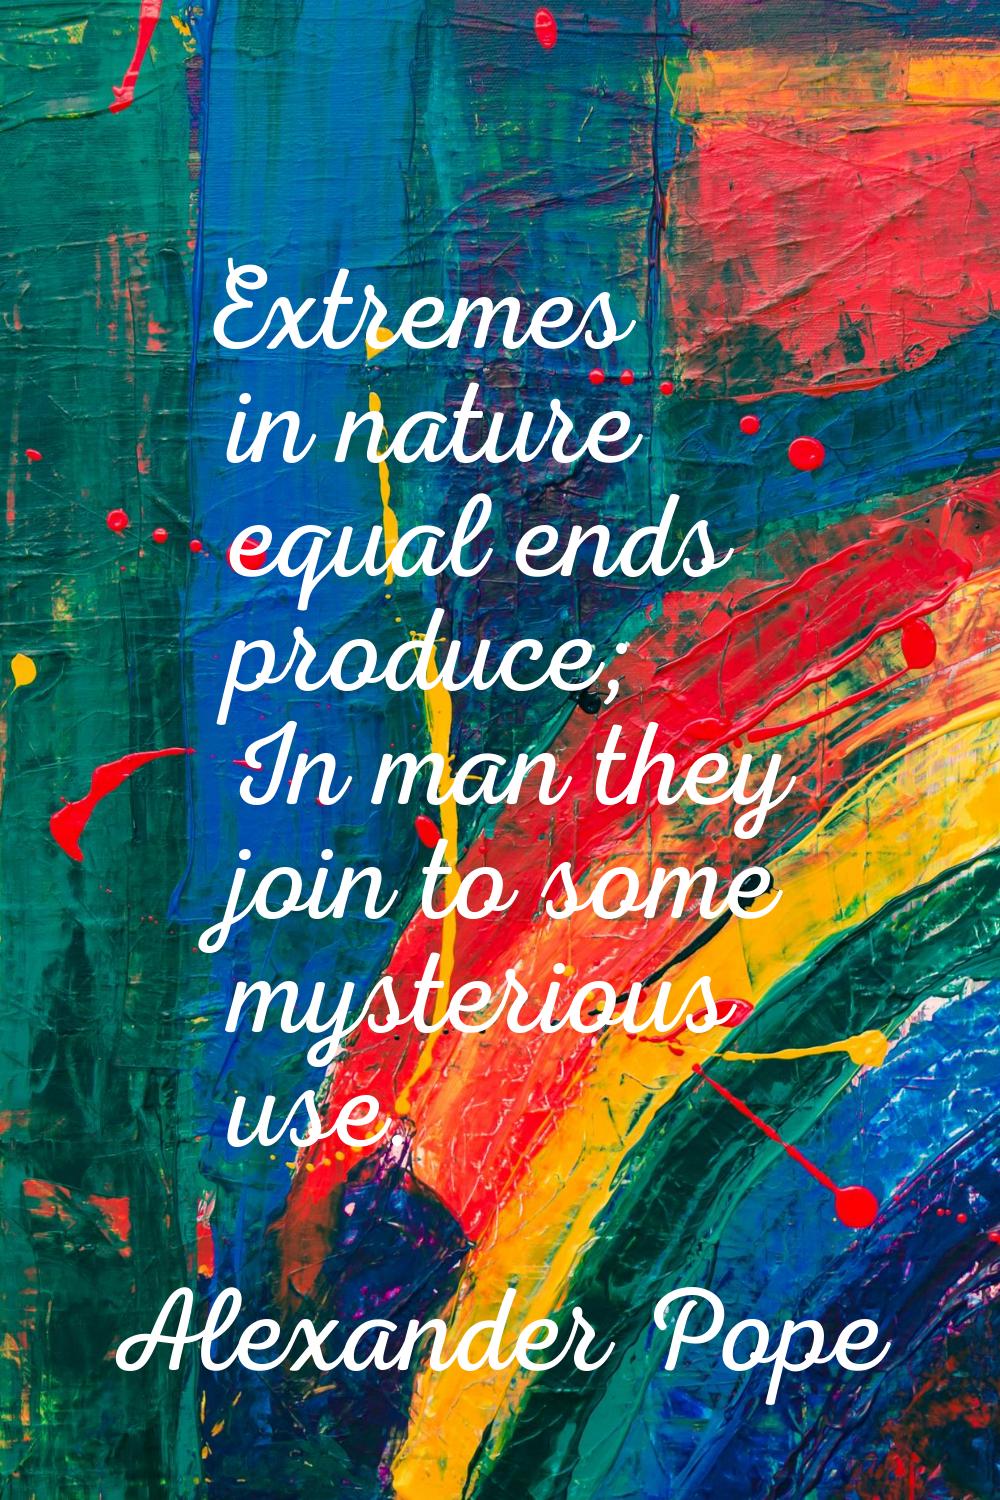 Extremes in nature equal ends produce; In man they join to some mysterious use.